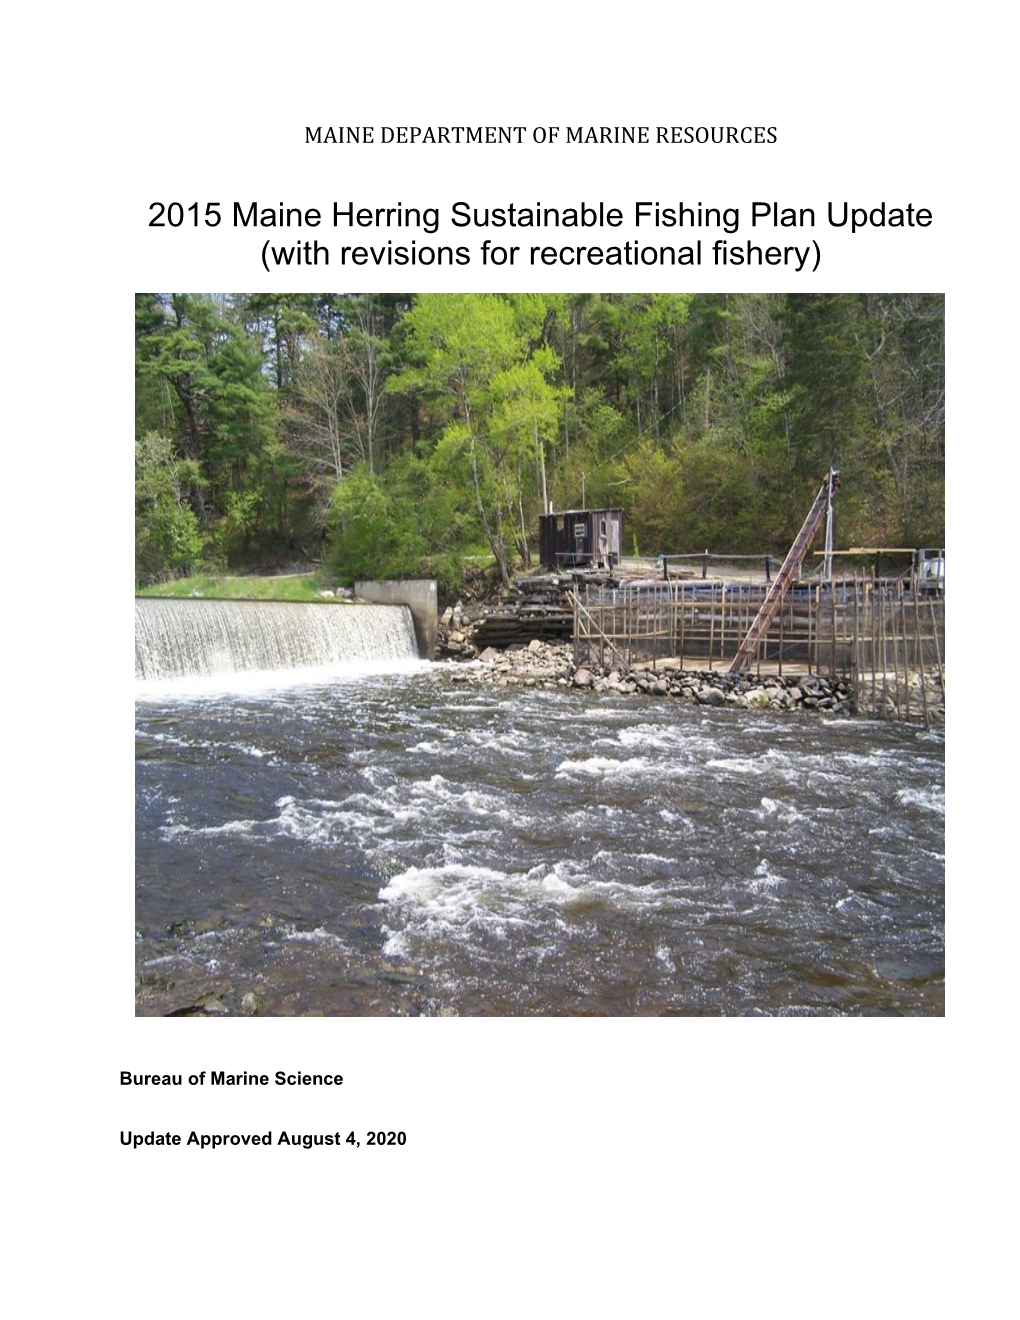 2015 Maine Herring Sustainable Fishing Plan Update (With Revisions for Recreational Fishery)